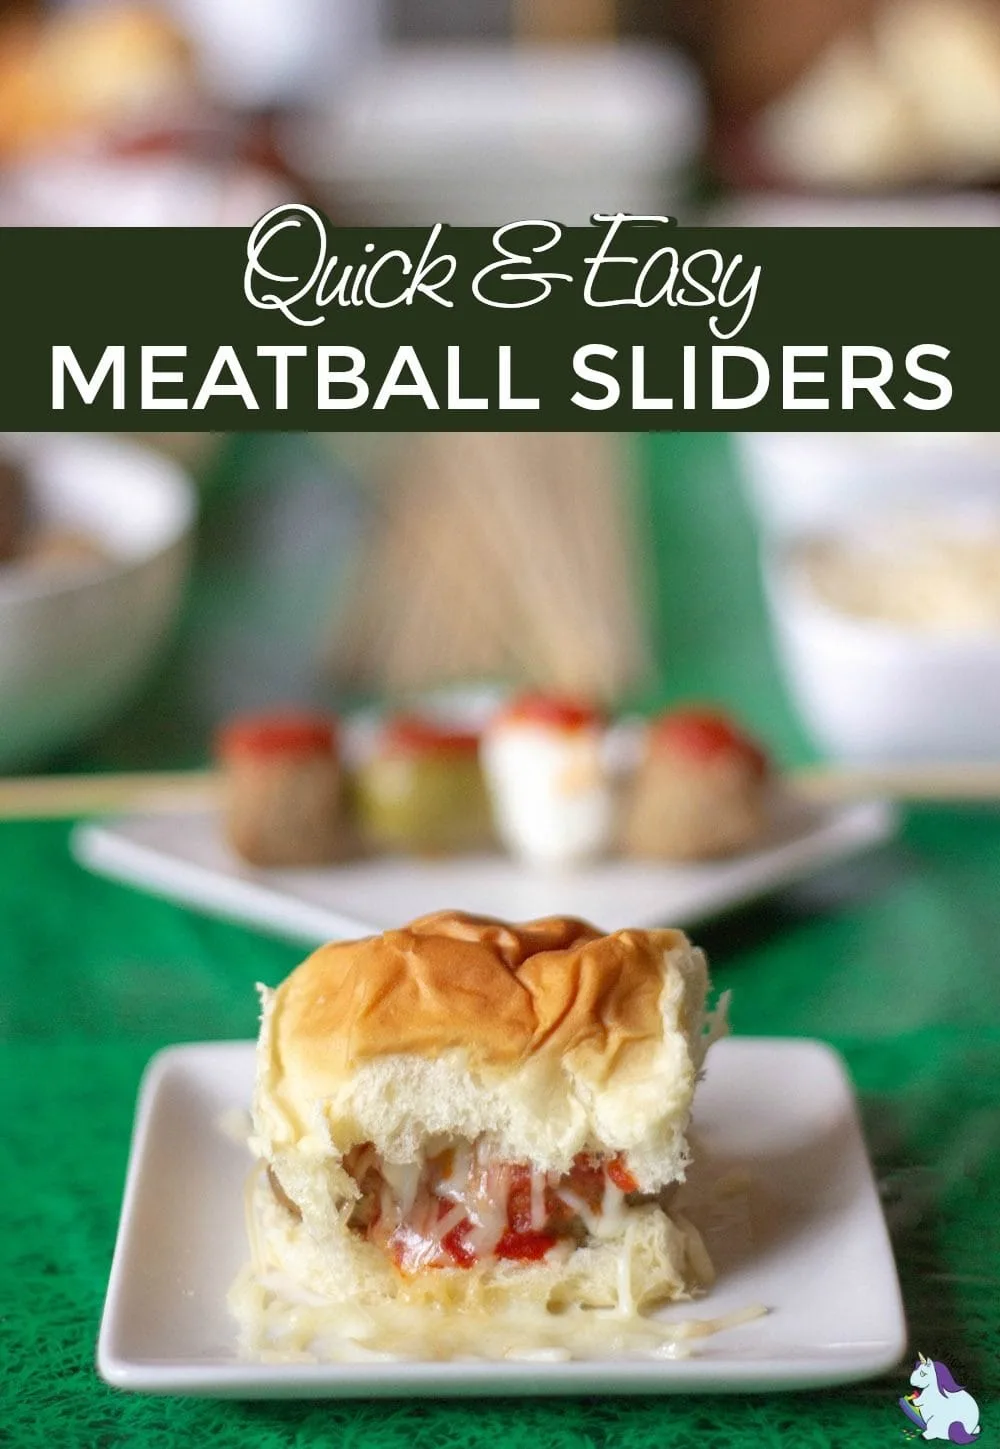 Meatball slider with cheese on a table decorated for game day.